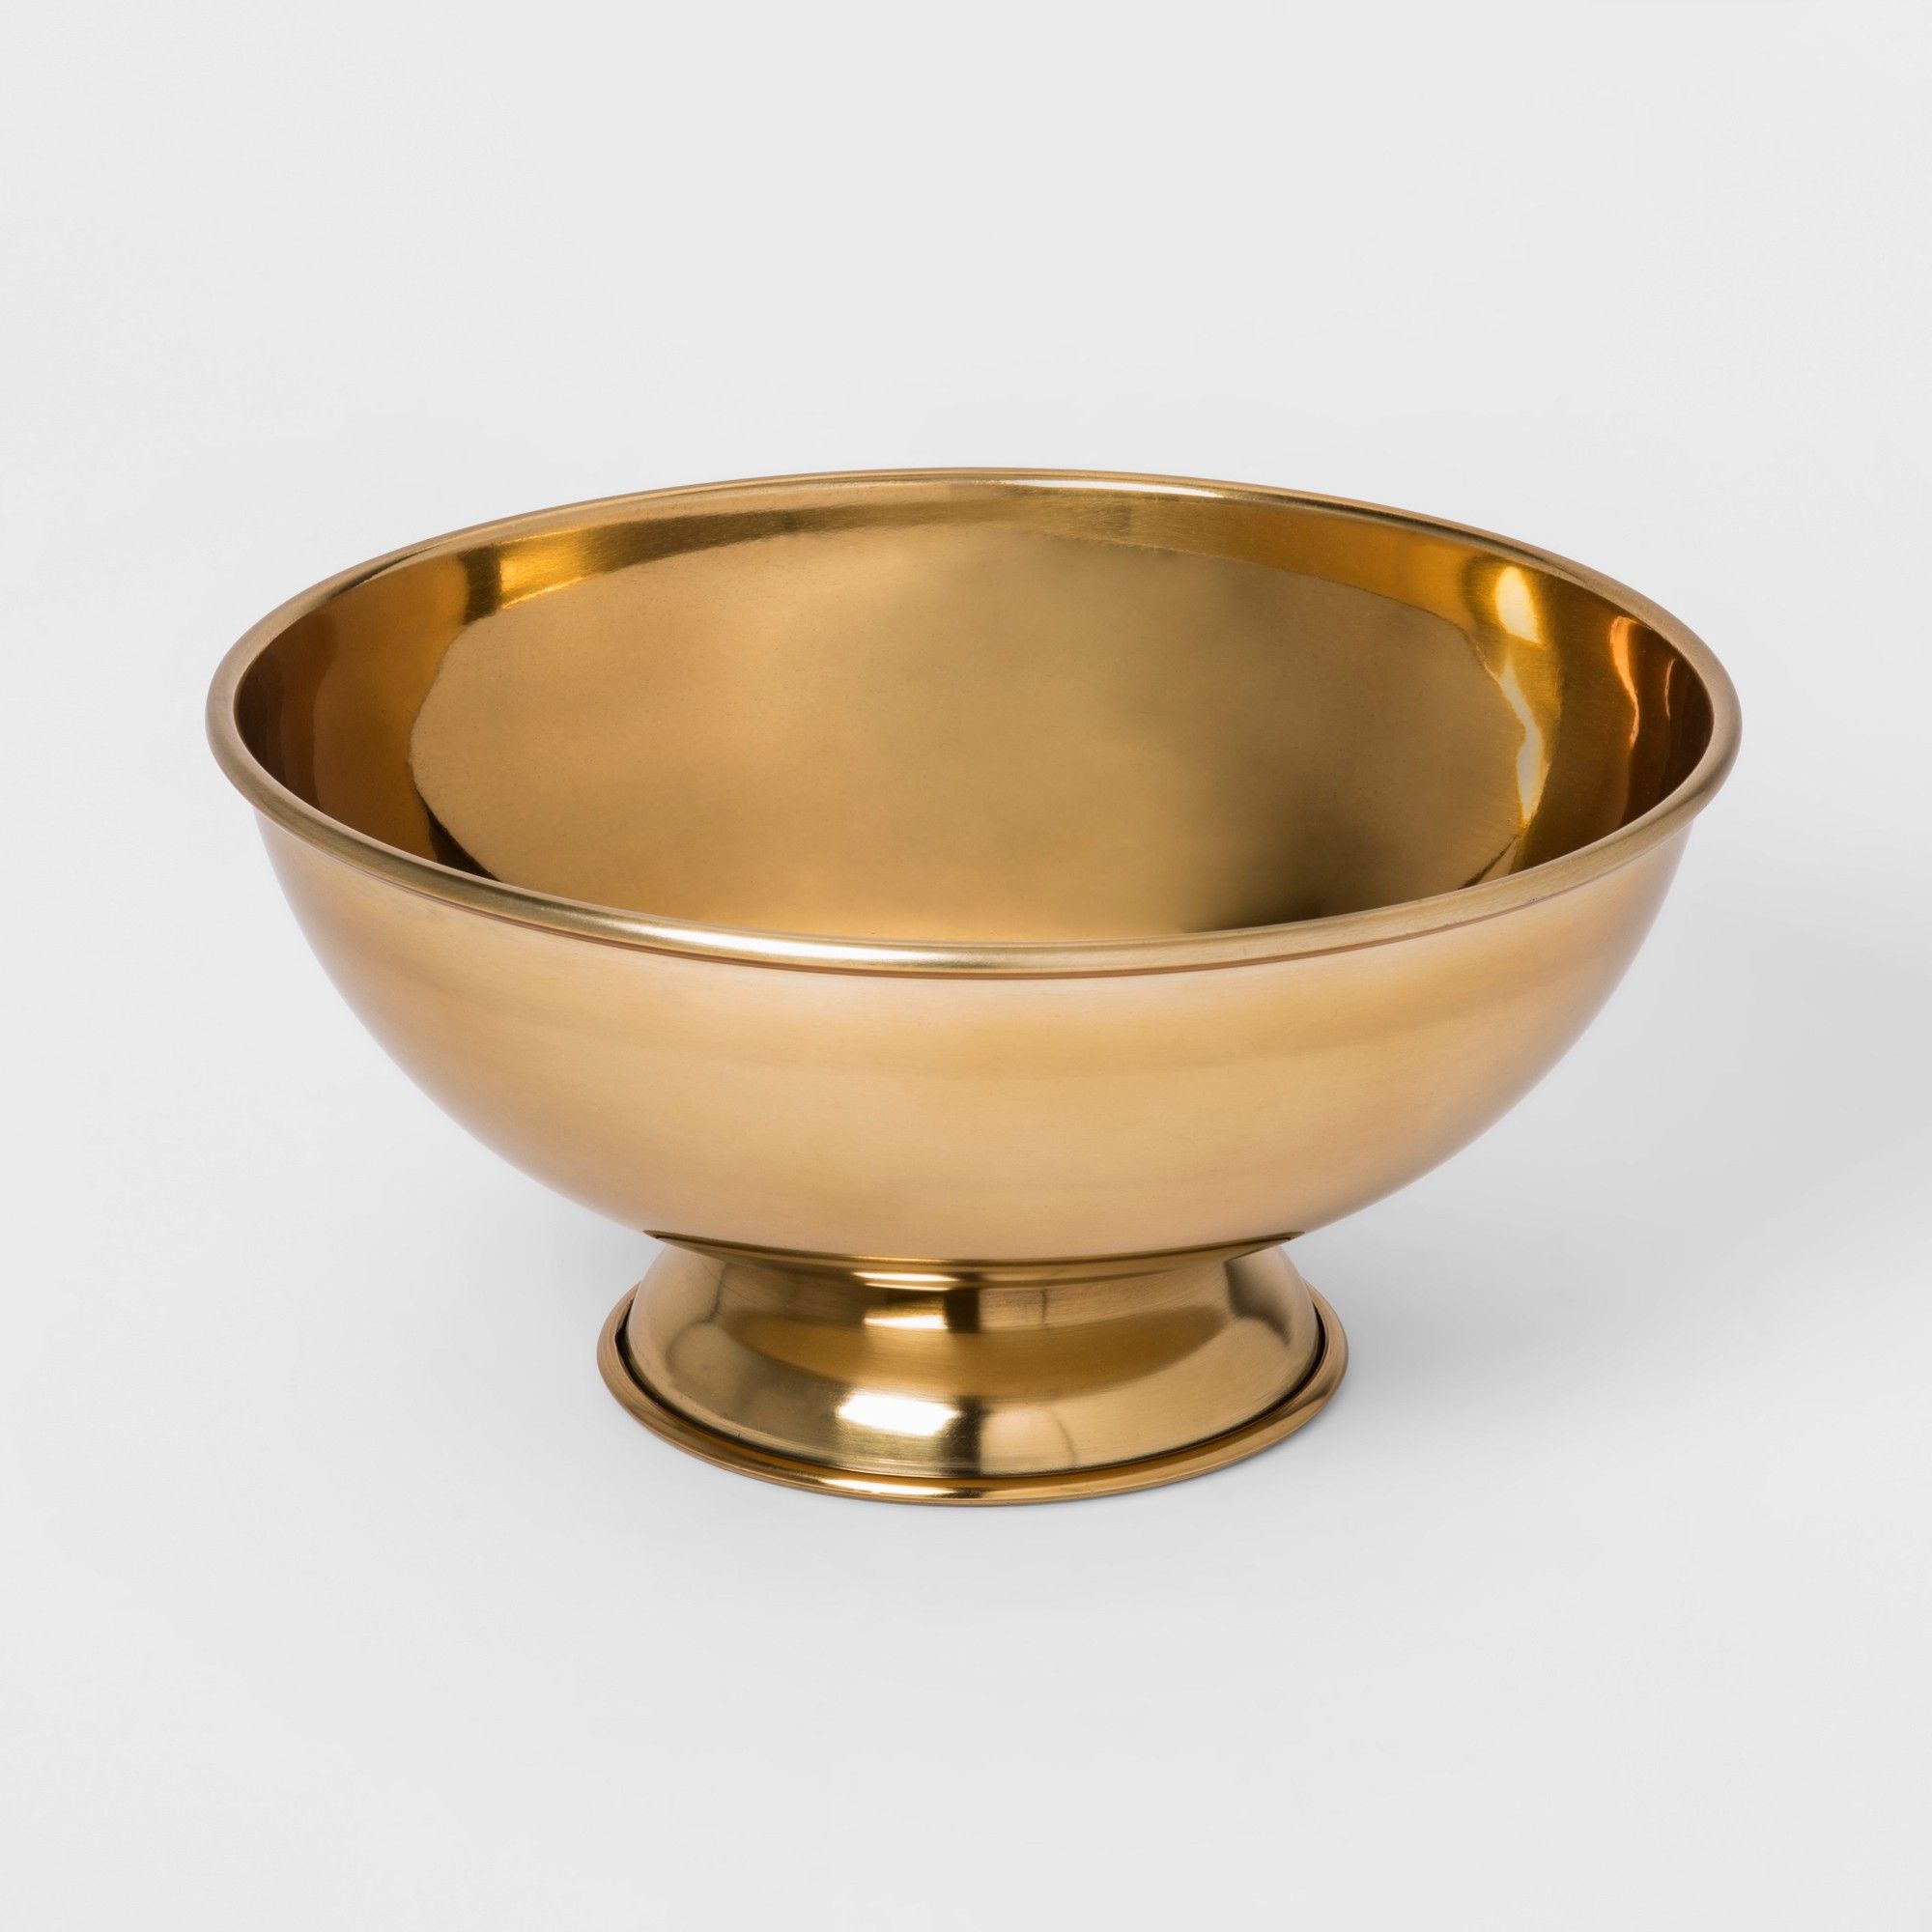 Vase And Bowl Wall Decor By Alcott Hill In 2019 Decorative Bowl – Gold – Threshold (View 17 of 20)